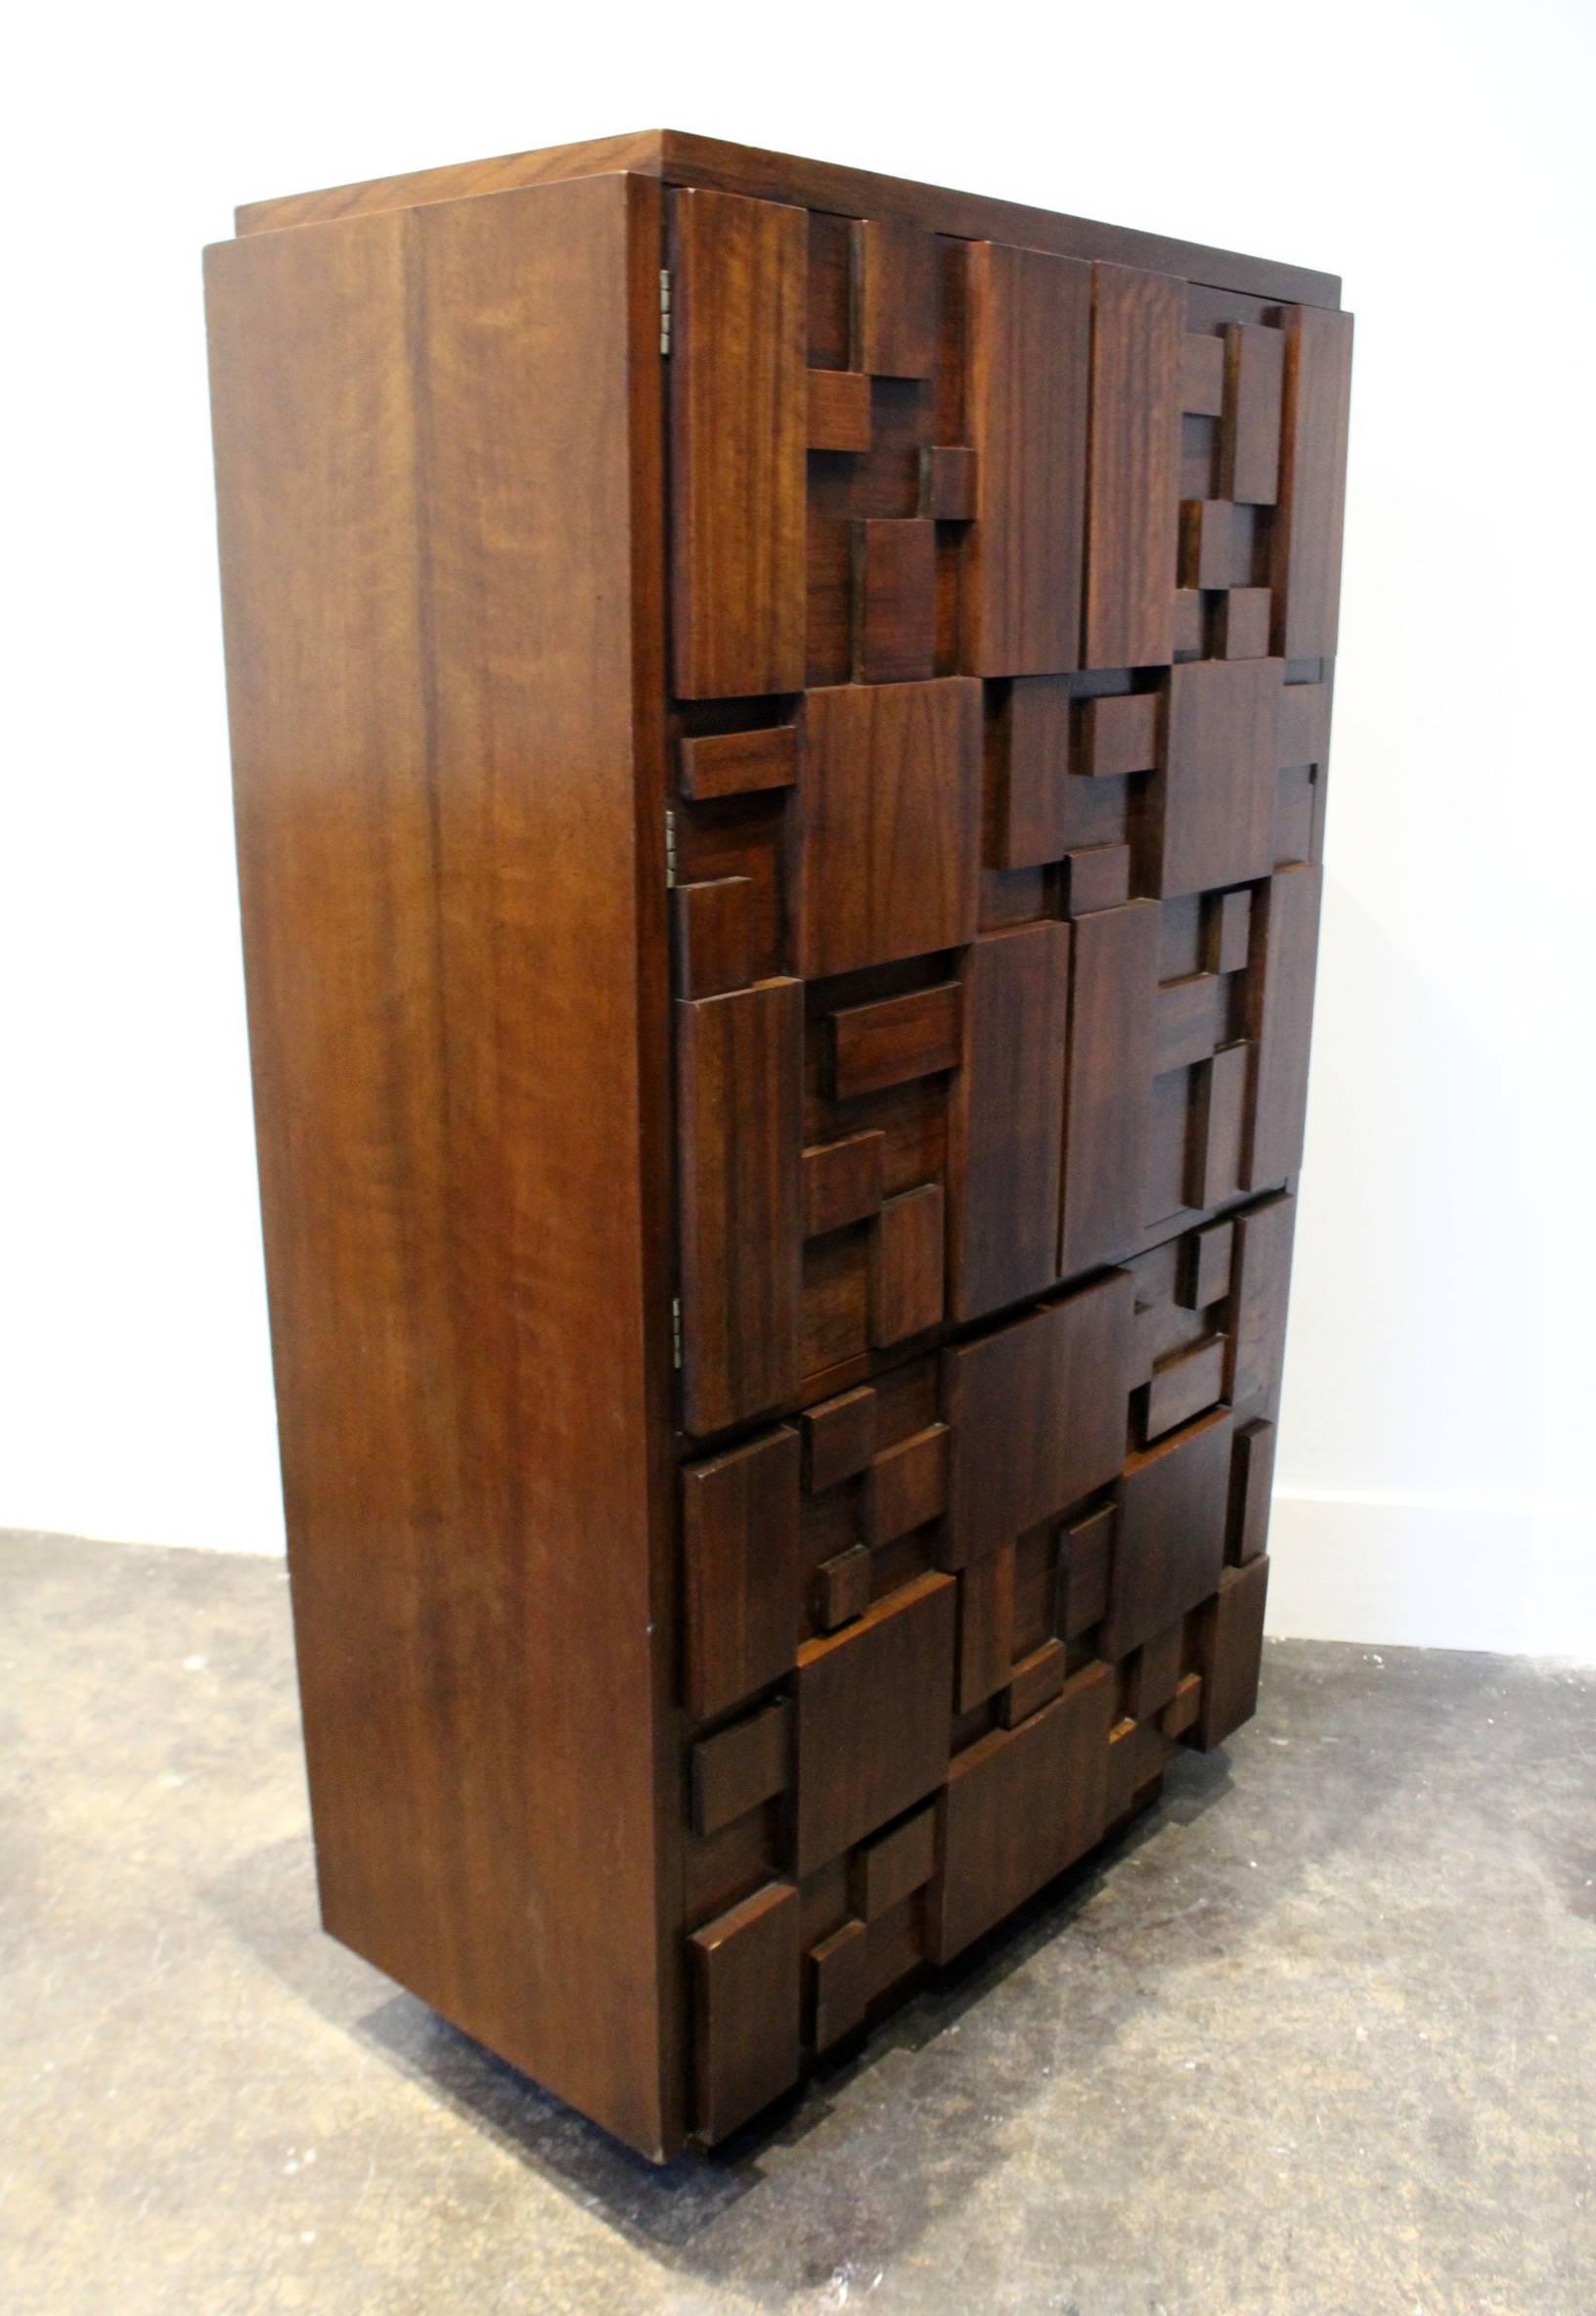 Lane Furniture's Classic 1970s, Brutalist tall chest. Intricate mosaic pattern across entire front. Three large drawers on the bottom. Top opens to reveal one more drawer and two shelves. Whole bedroom set is available.